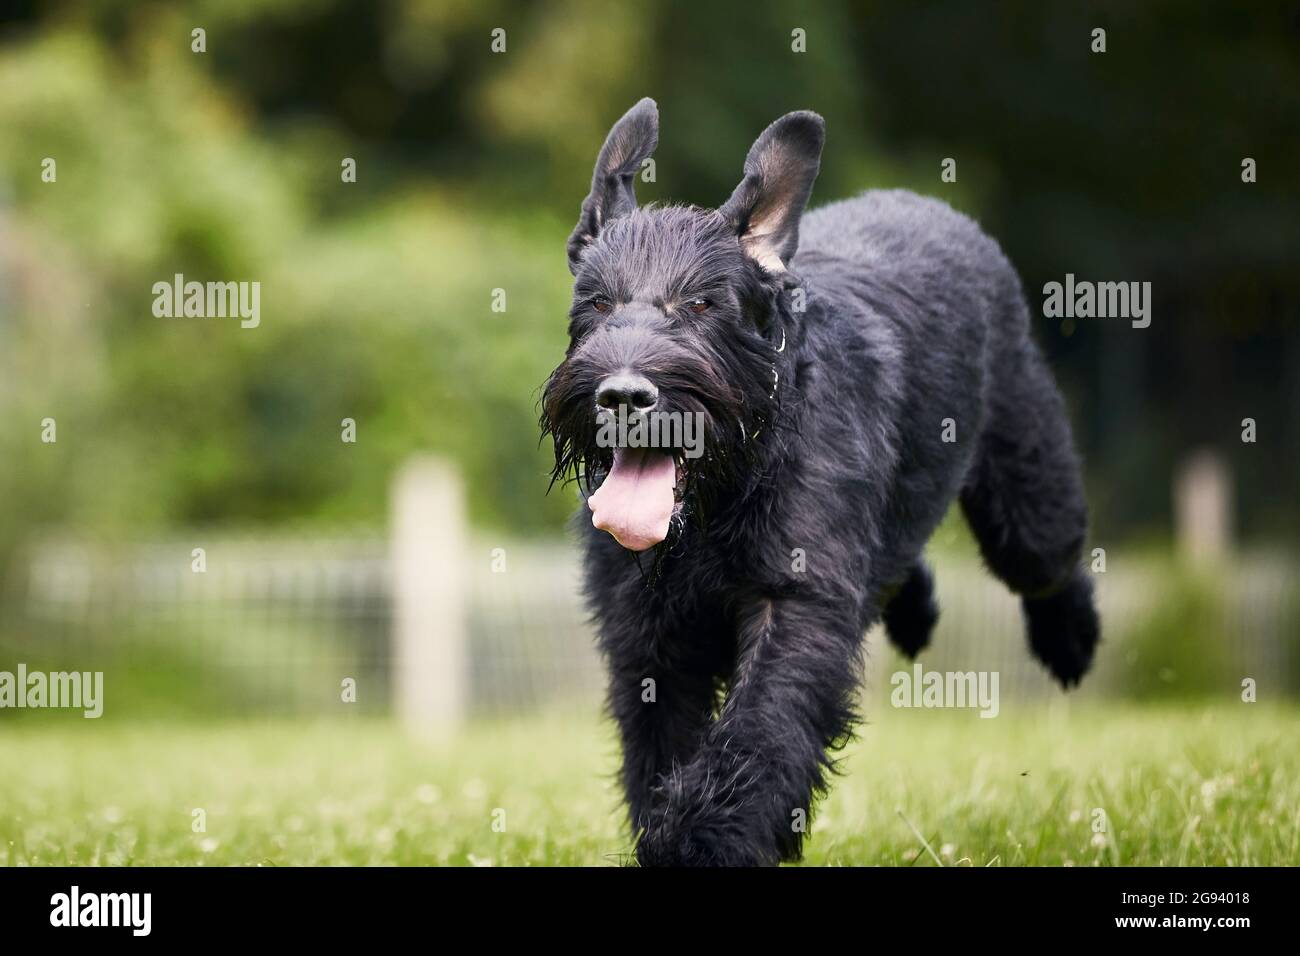 Dog running in grass. Black Giant Schnauzer sprinting on meadow during summer day. Stock Photo